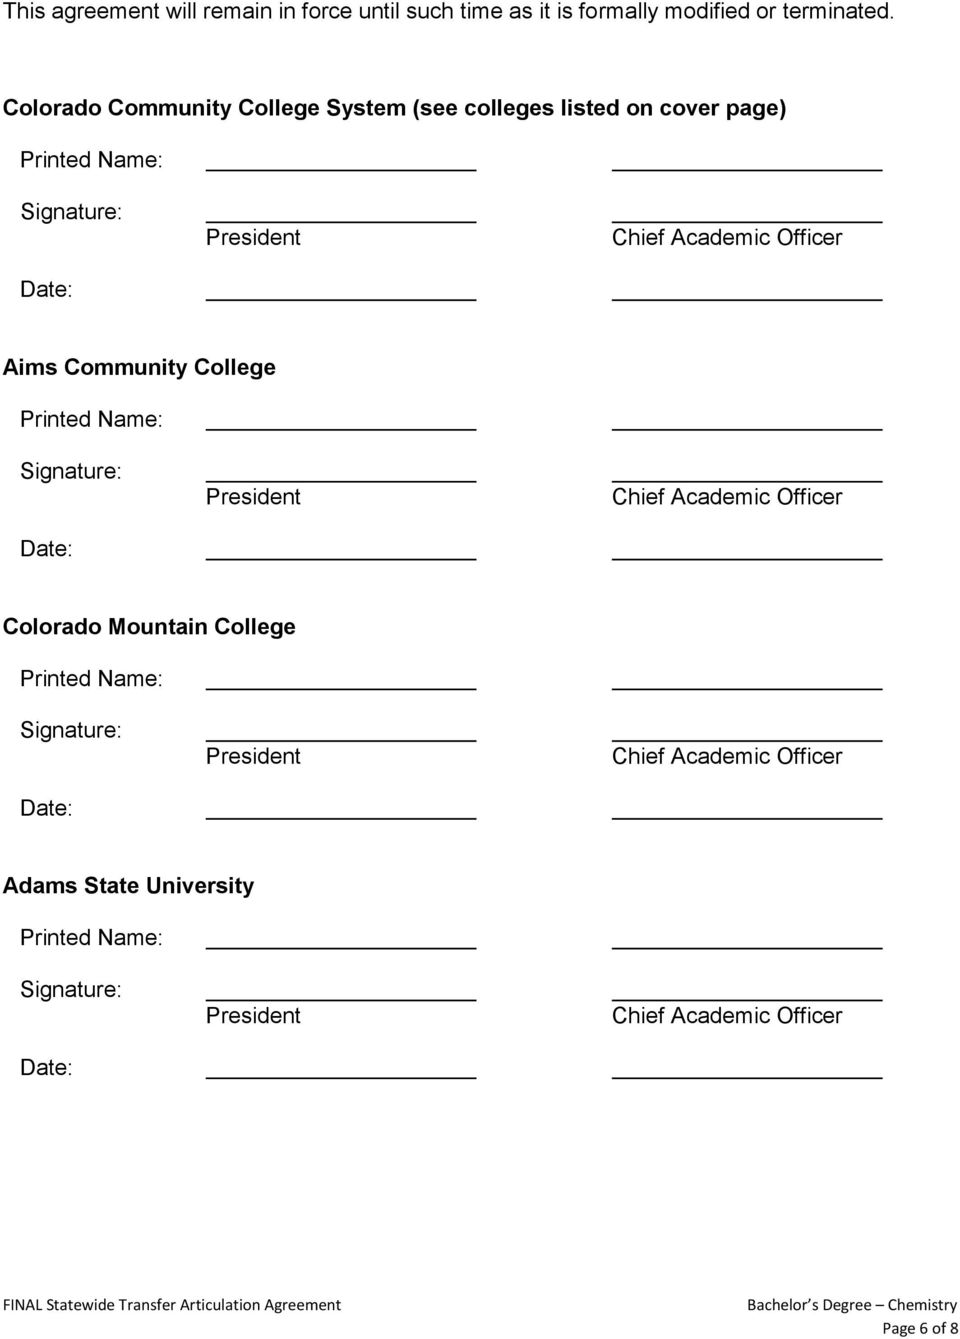 Colorado Community College System (see colleges listed on